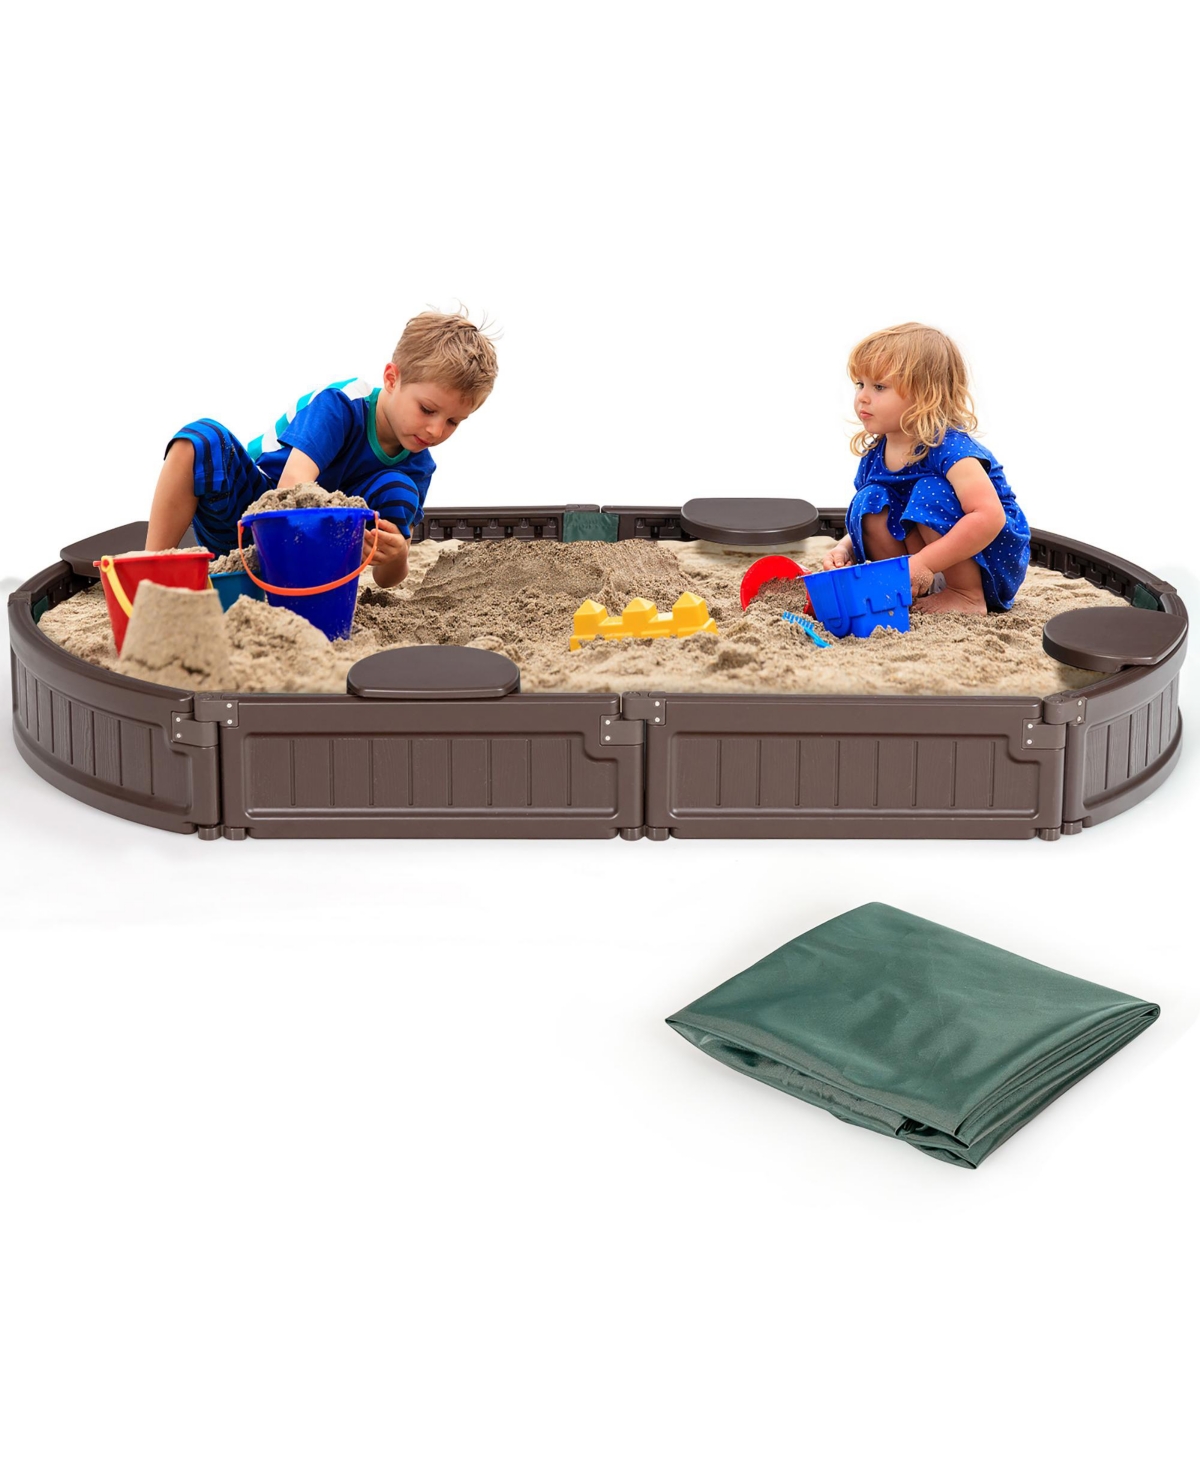 6F Wooden Sandbox w/Built-in Corner Seat, Cover, Bottom Liner for Outdoor Play - Brown